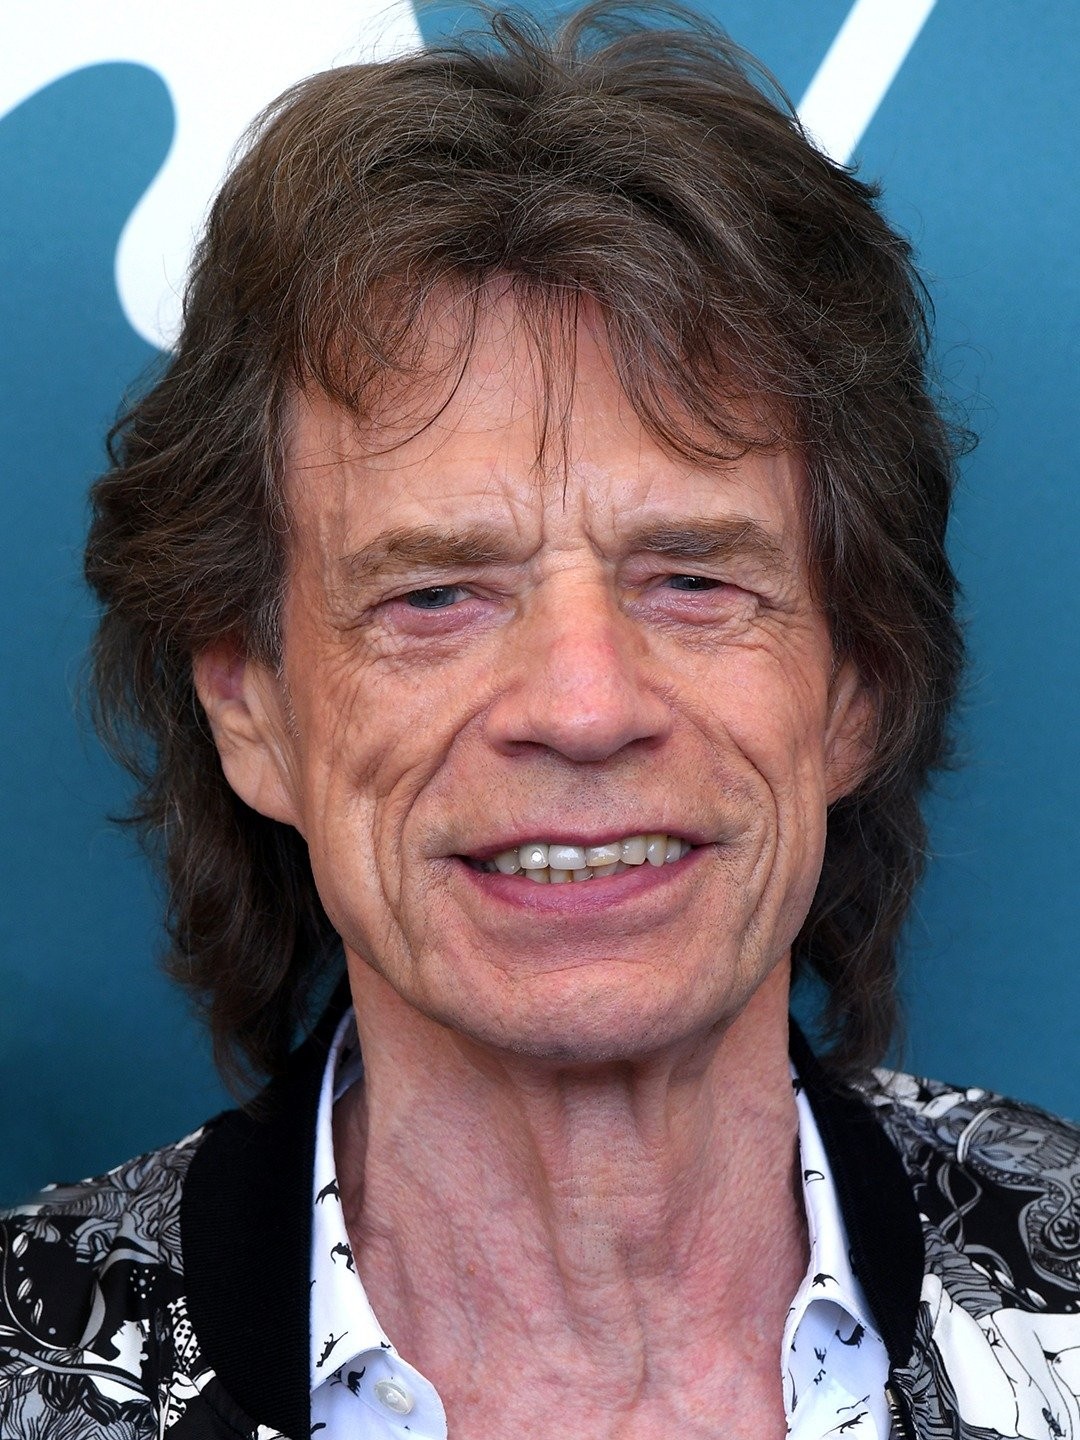 mick jagger images